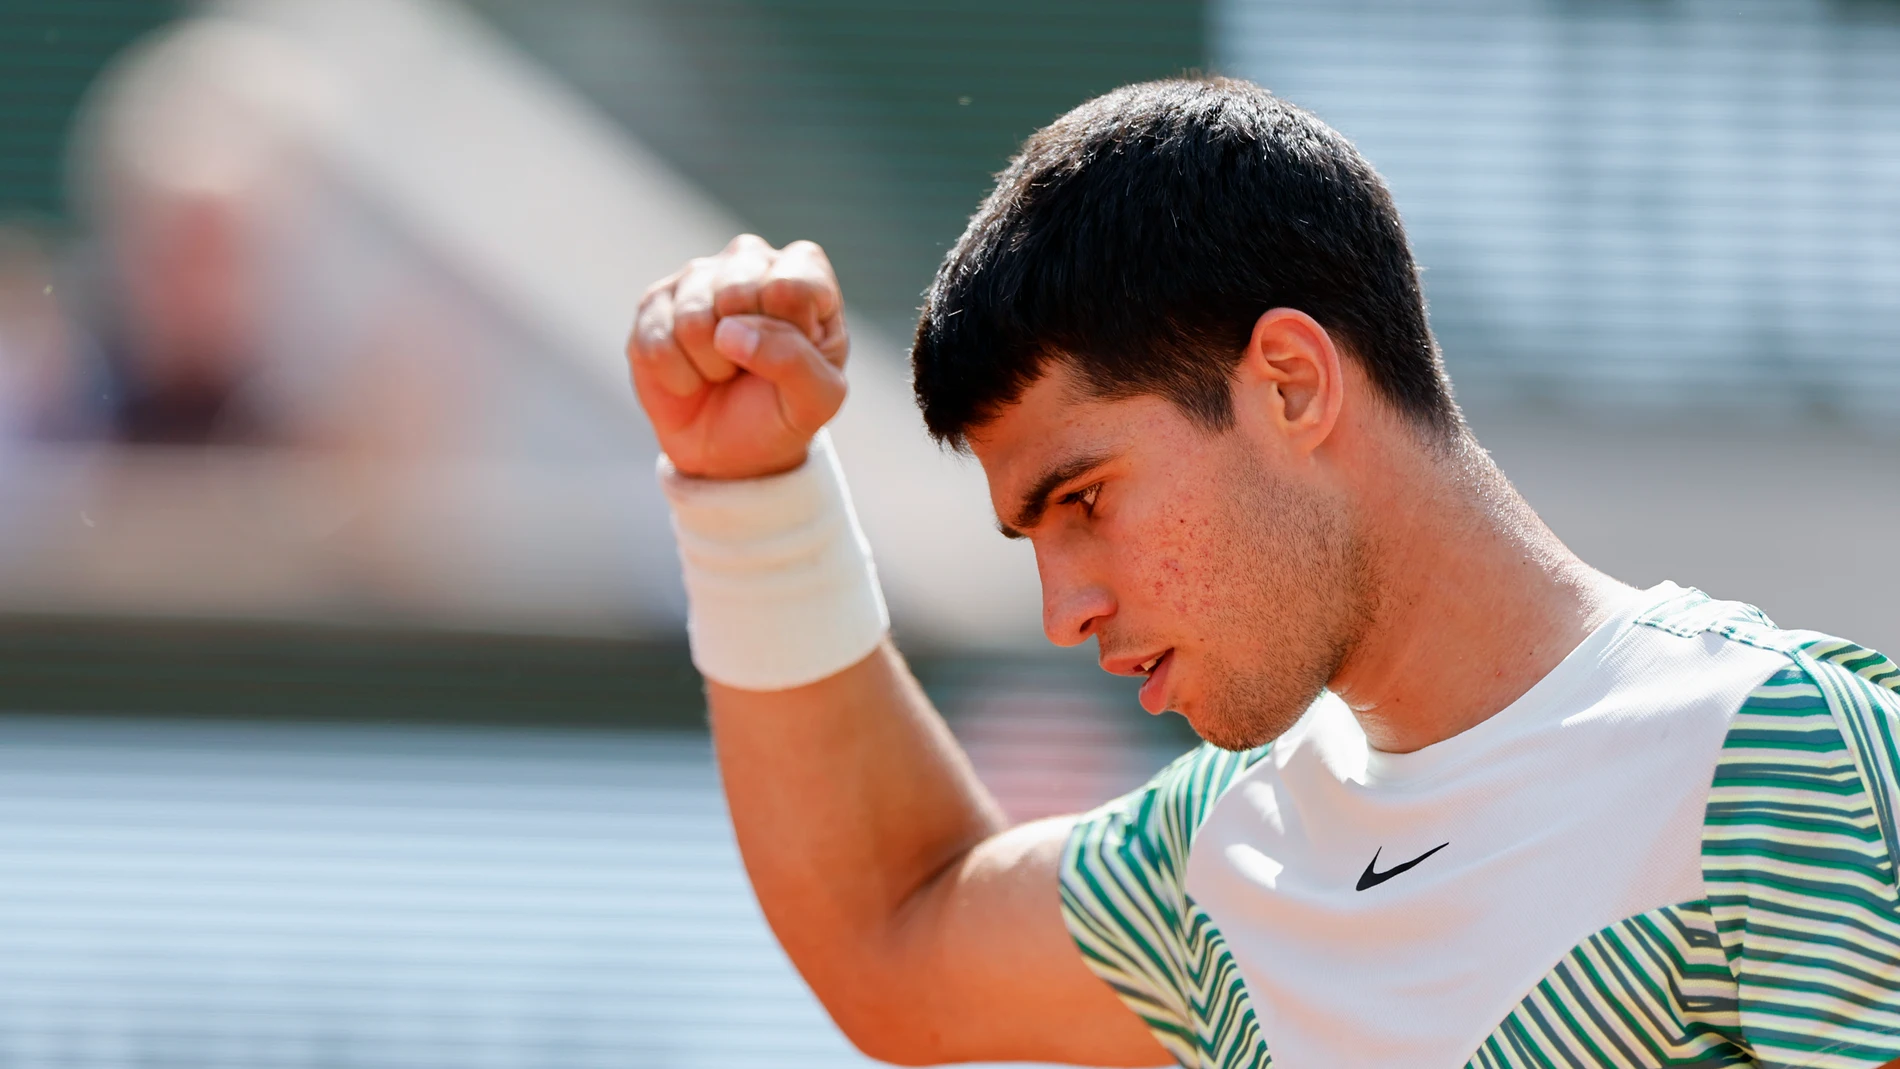 Spain's Carlos Alcaraz reacts during his semifinal match of the French Open tennis tournament against Serbia's Novak Djokovic at the Roland Garros stadium in Paris, Friday, June 9, 2023. (AP Photo/Jean-Francois Badias)